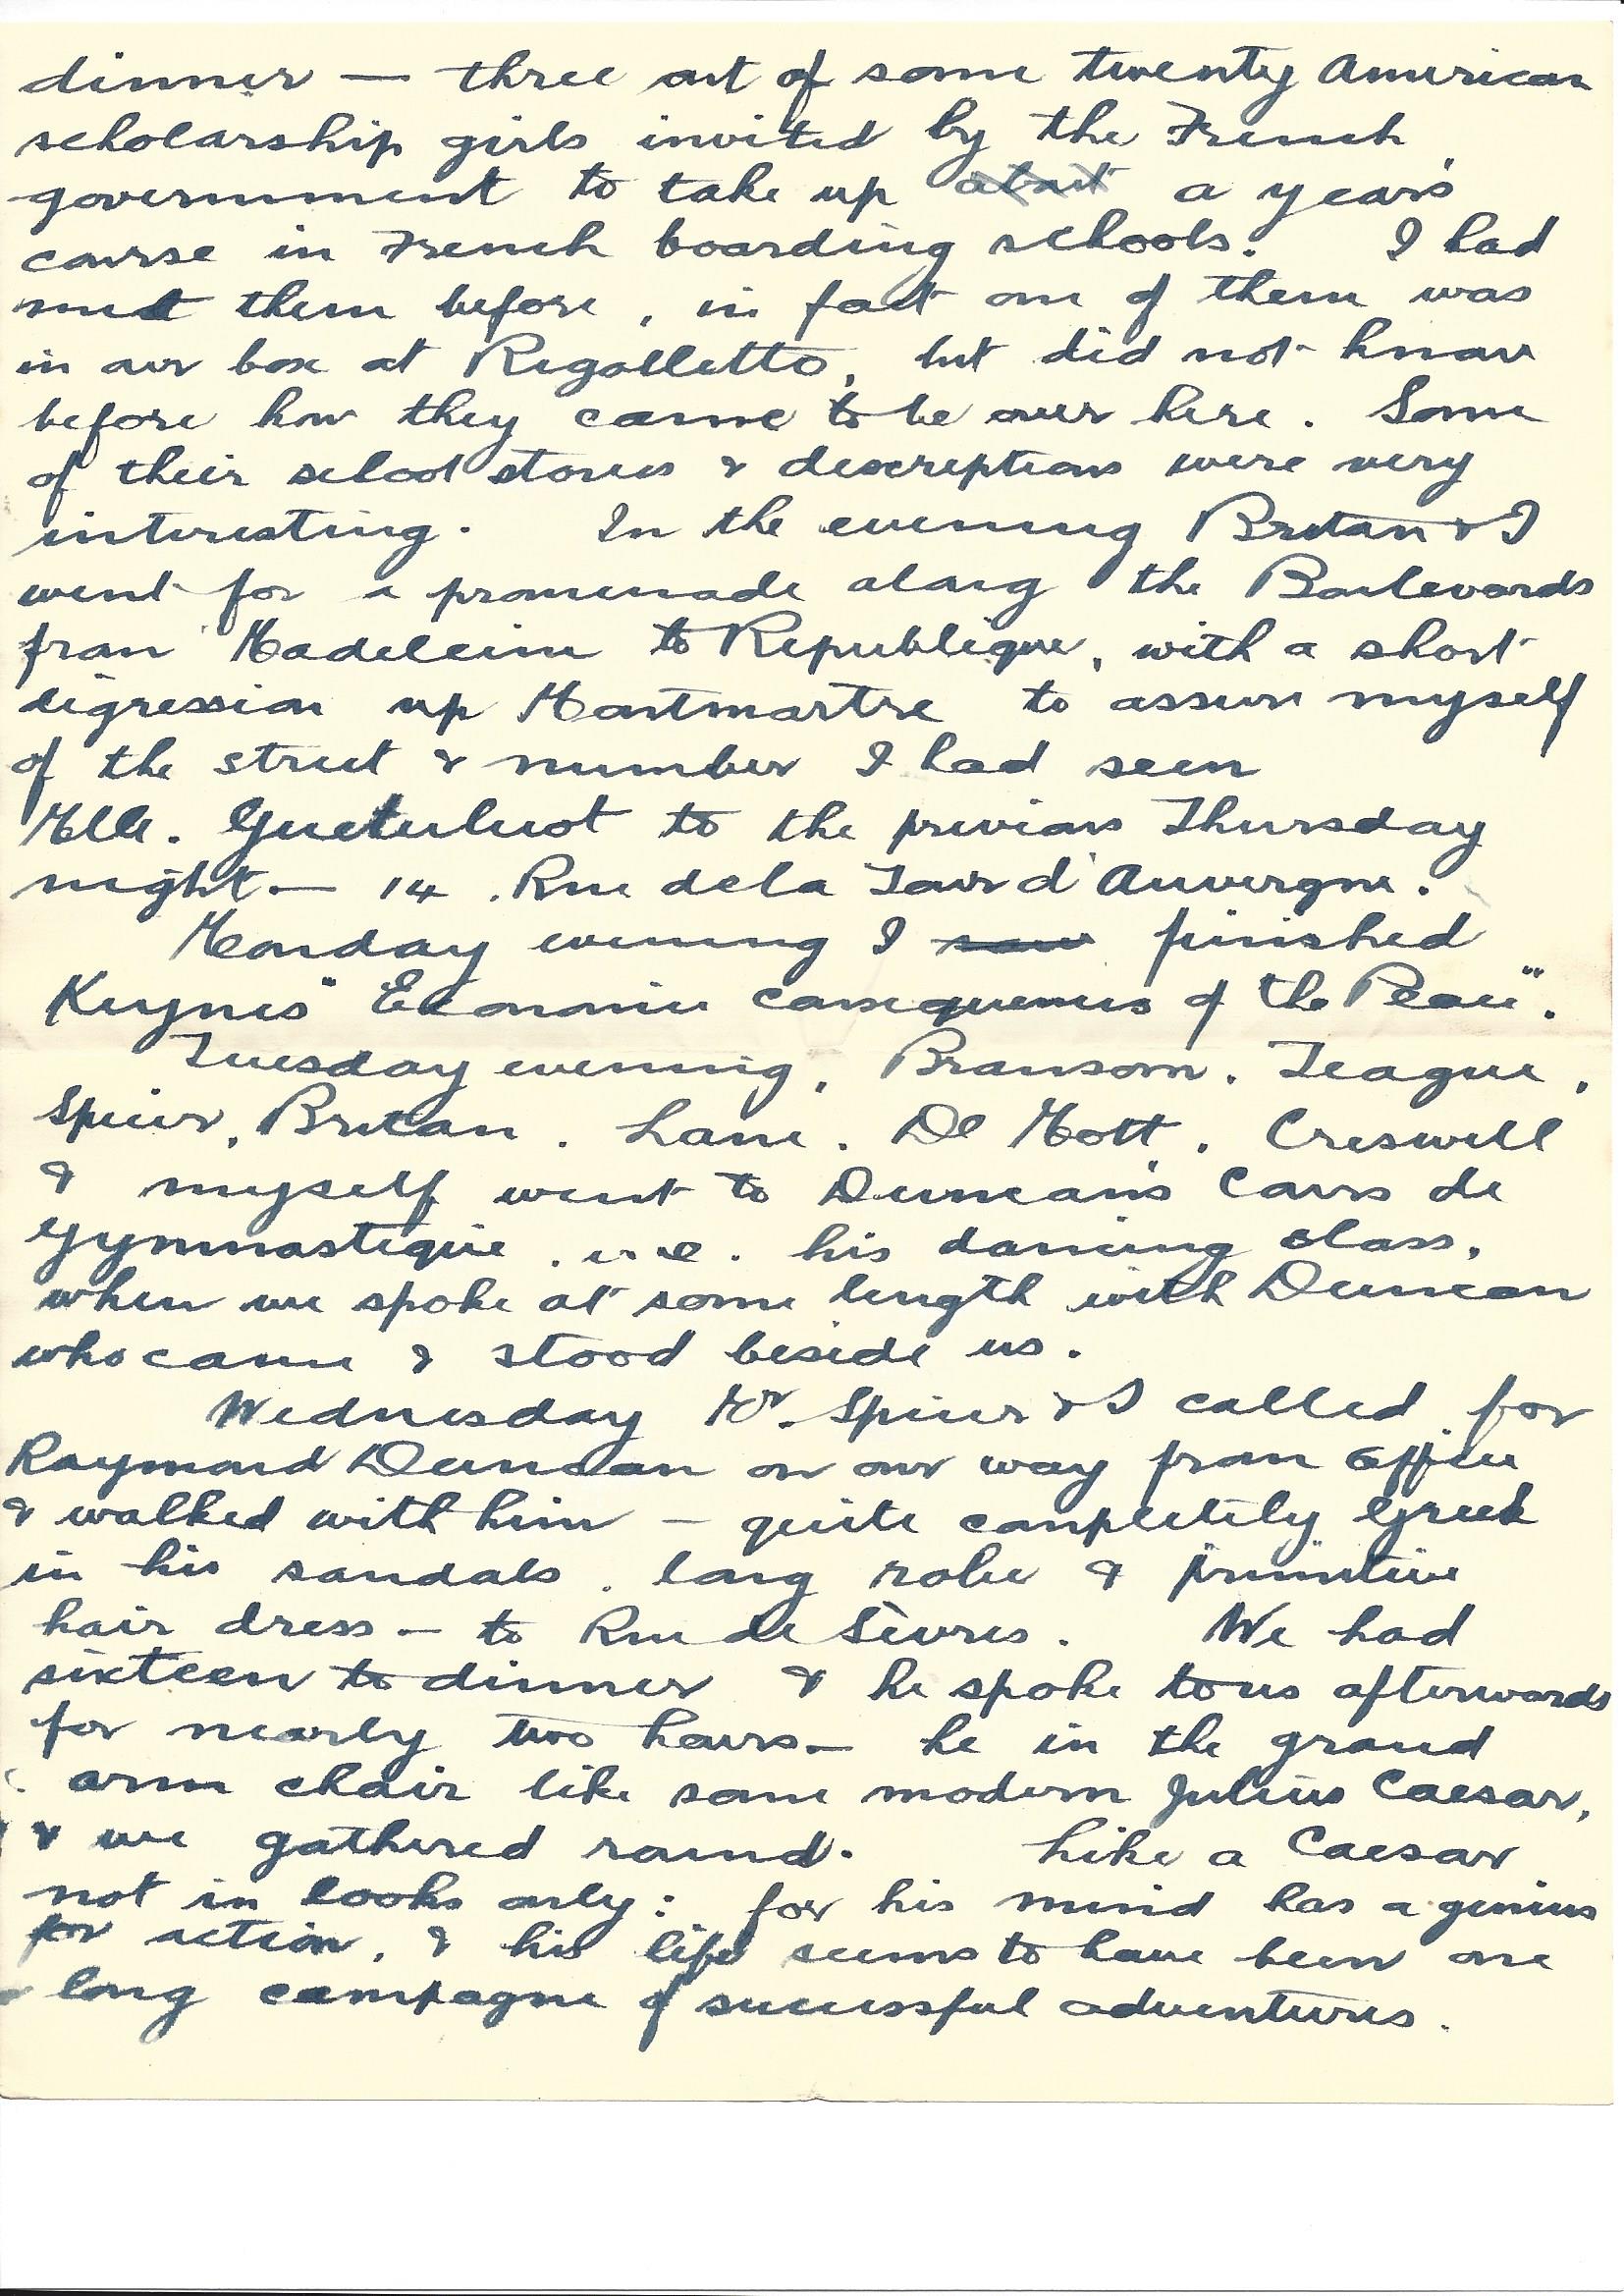 1920-01-25 page 3 letter by Donald Bearman